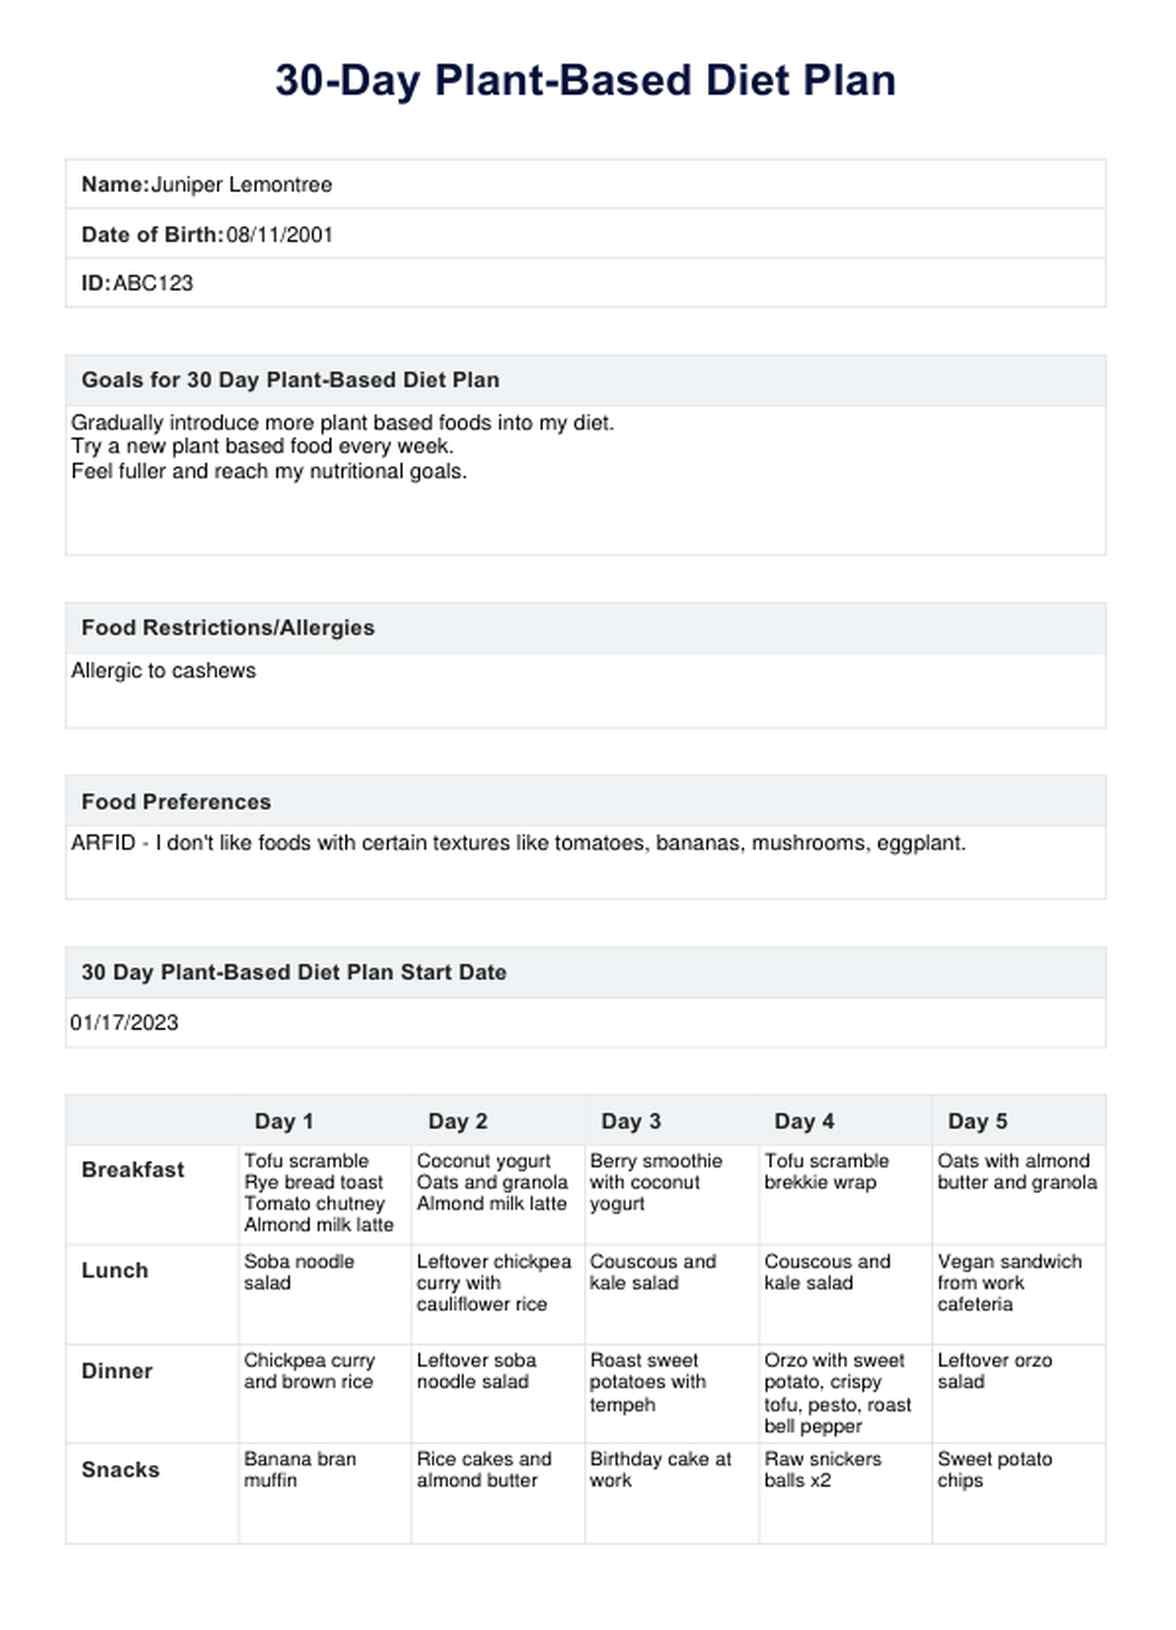 30 Day Plant Based Diet Plan PDF Example